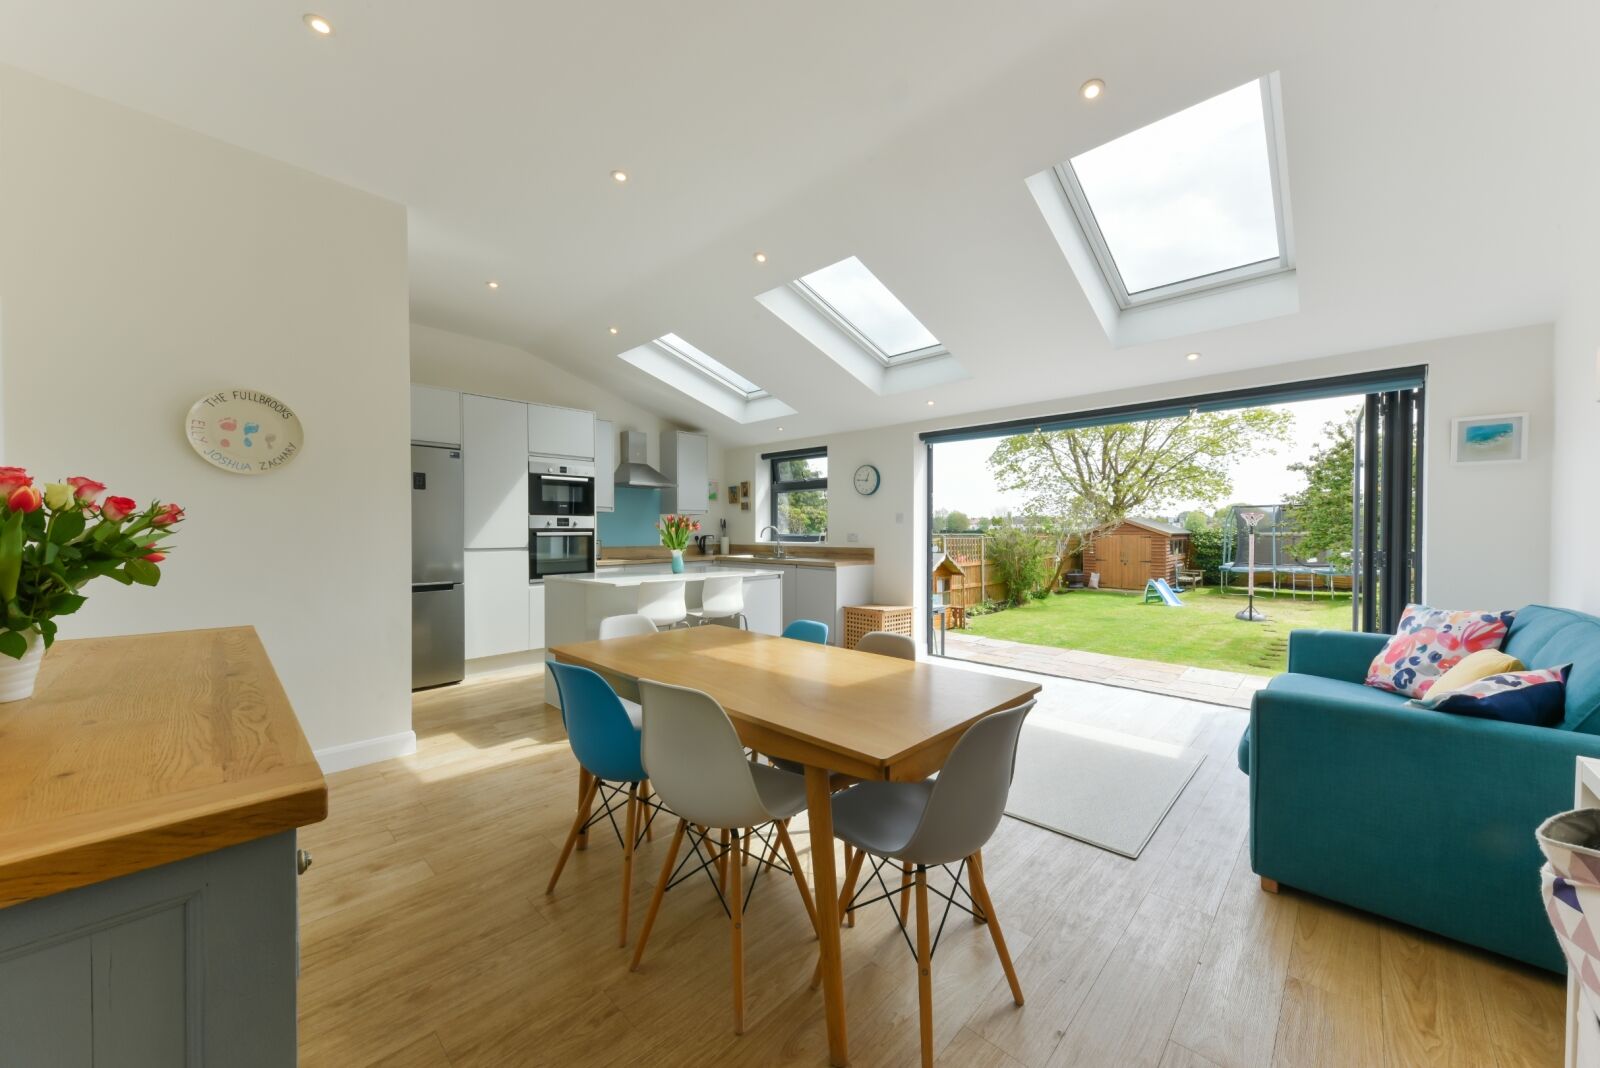 4 bedroom end terraced house for sale Whatley Avenue, Raynes Park, SW20, main image